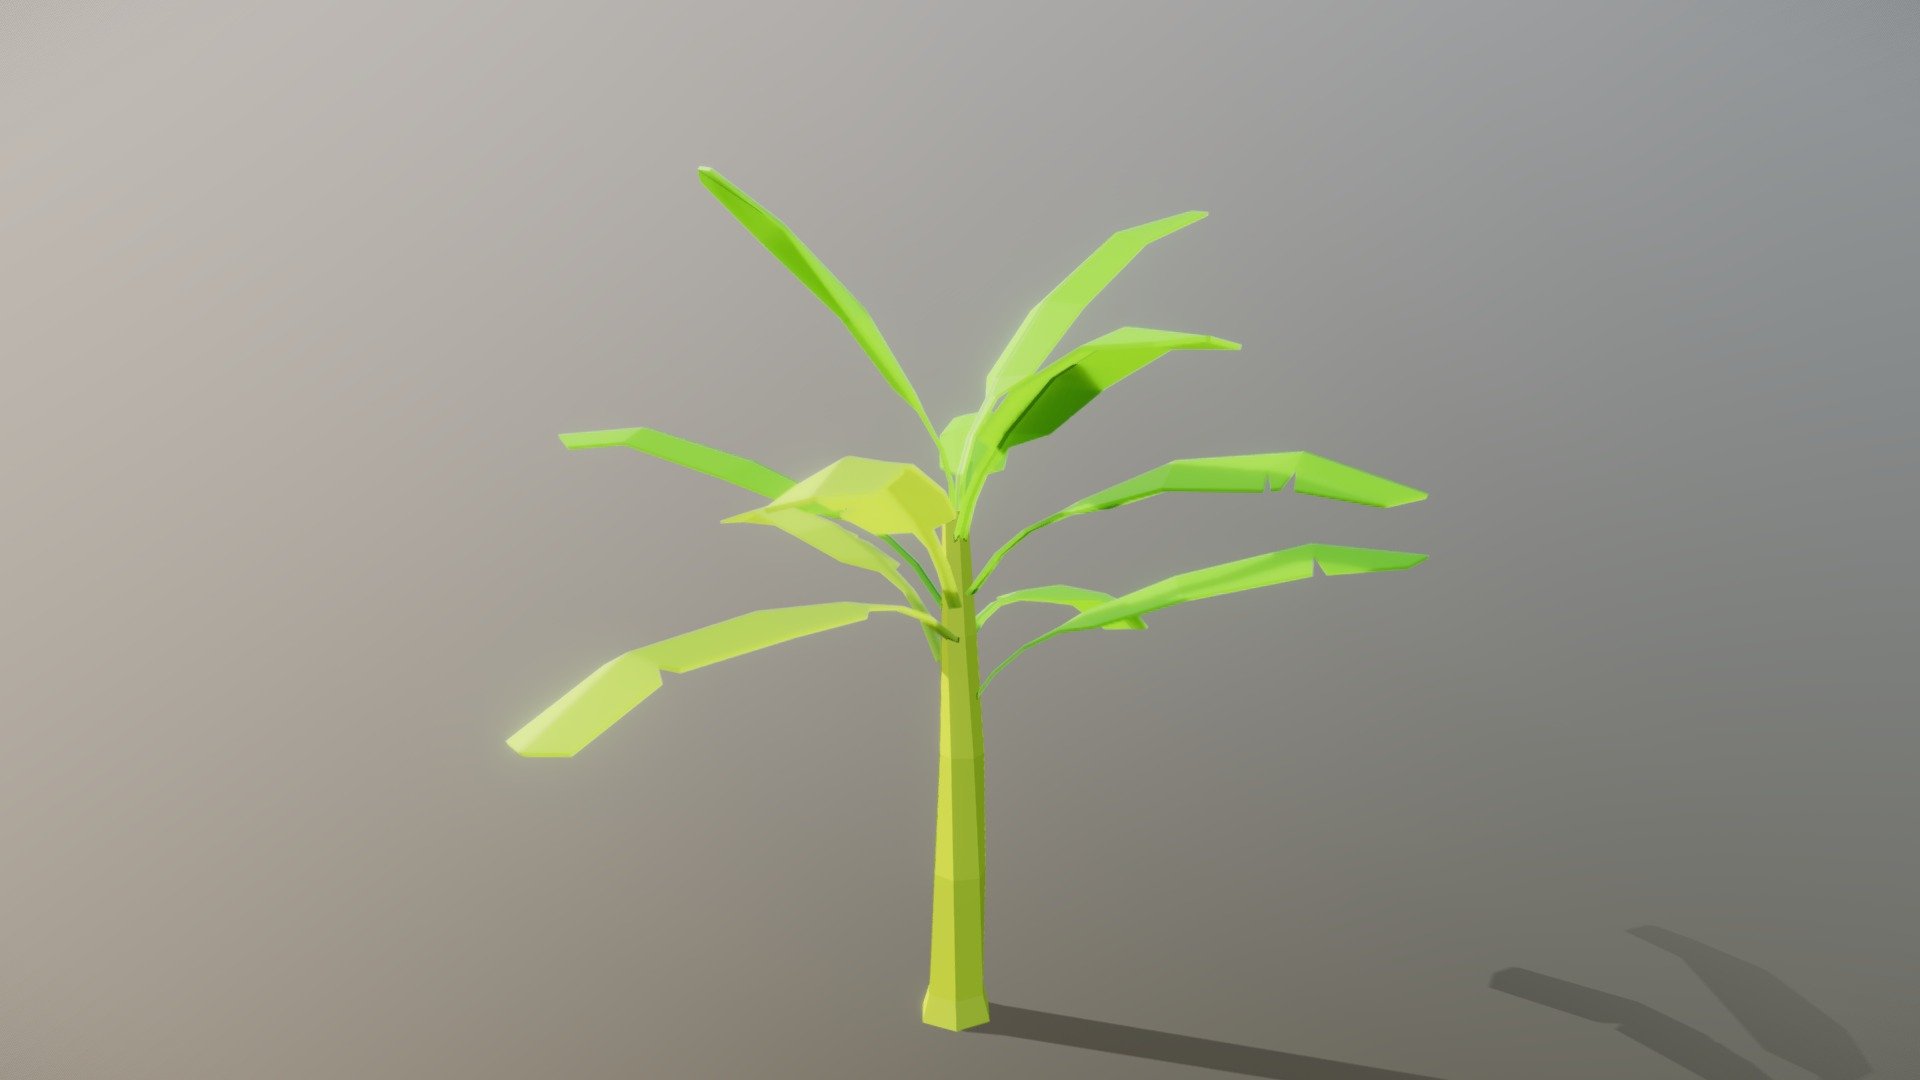 Low Poly Banana tree. Seperate material for each color for easy editing. Game ready 3d model